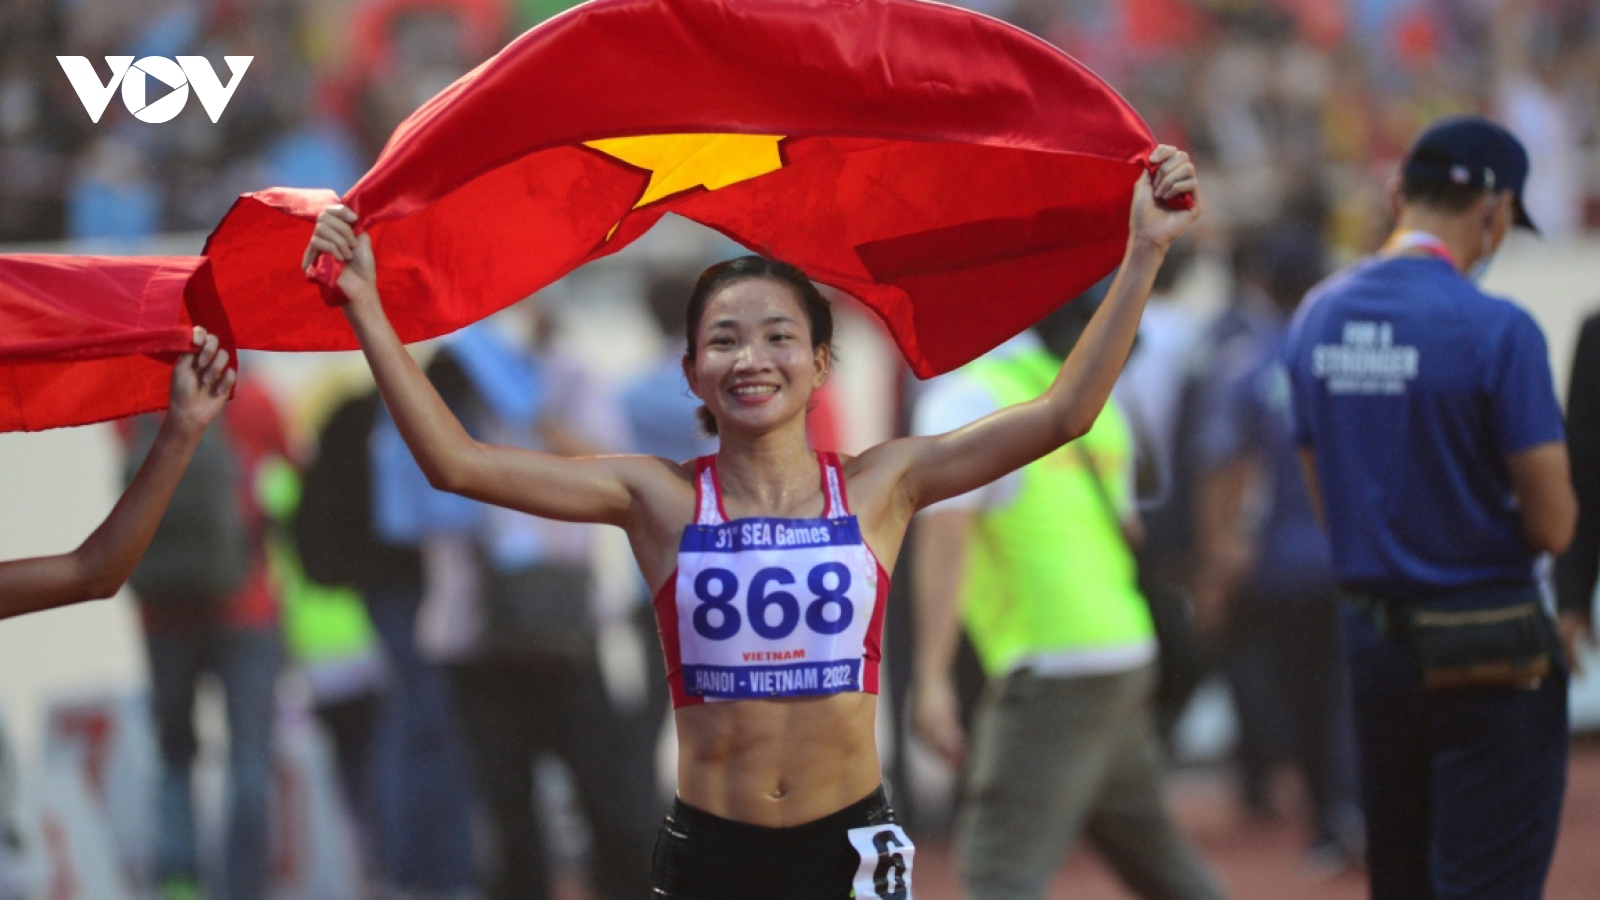 SEA Games 31 update: Vietnam leads medal count with 39 golds